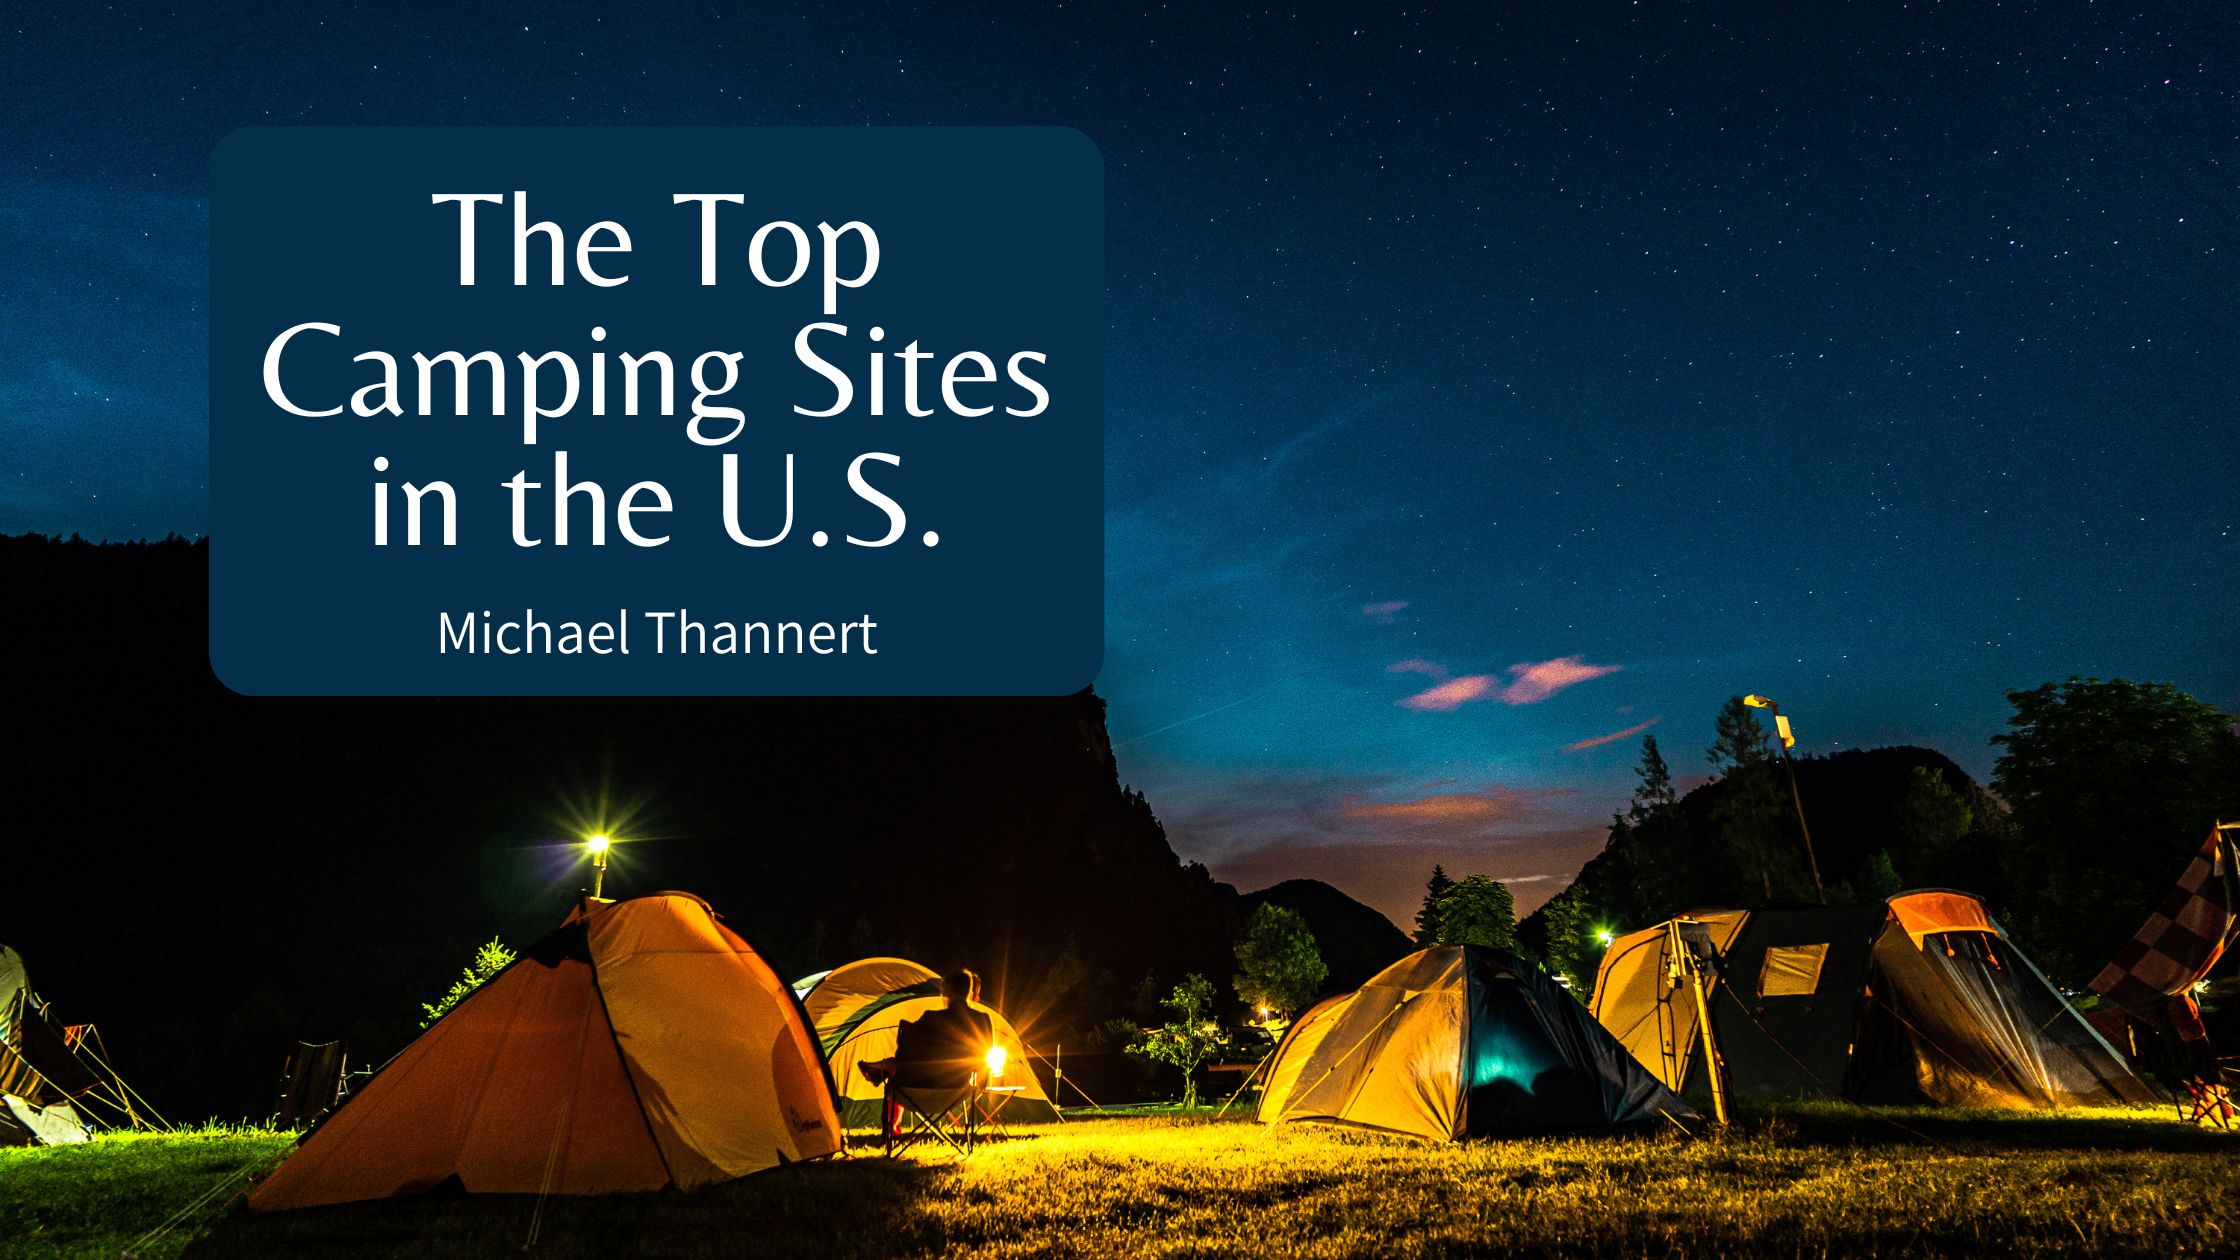 The Top Camping Sites in the U.S.